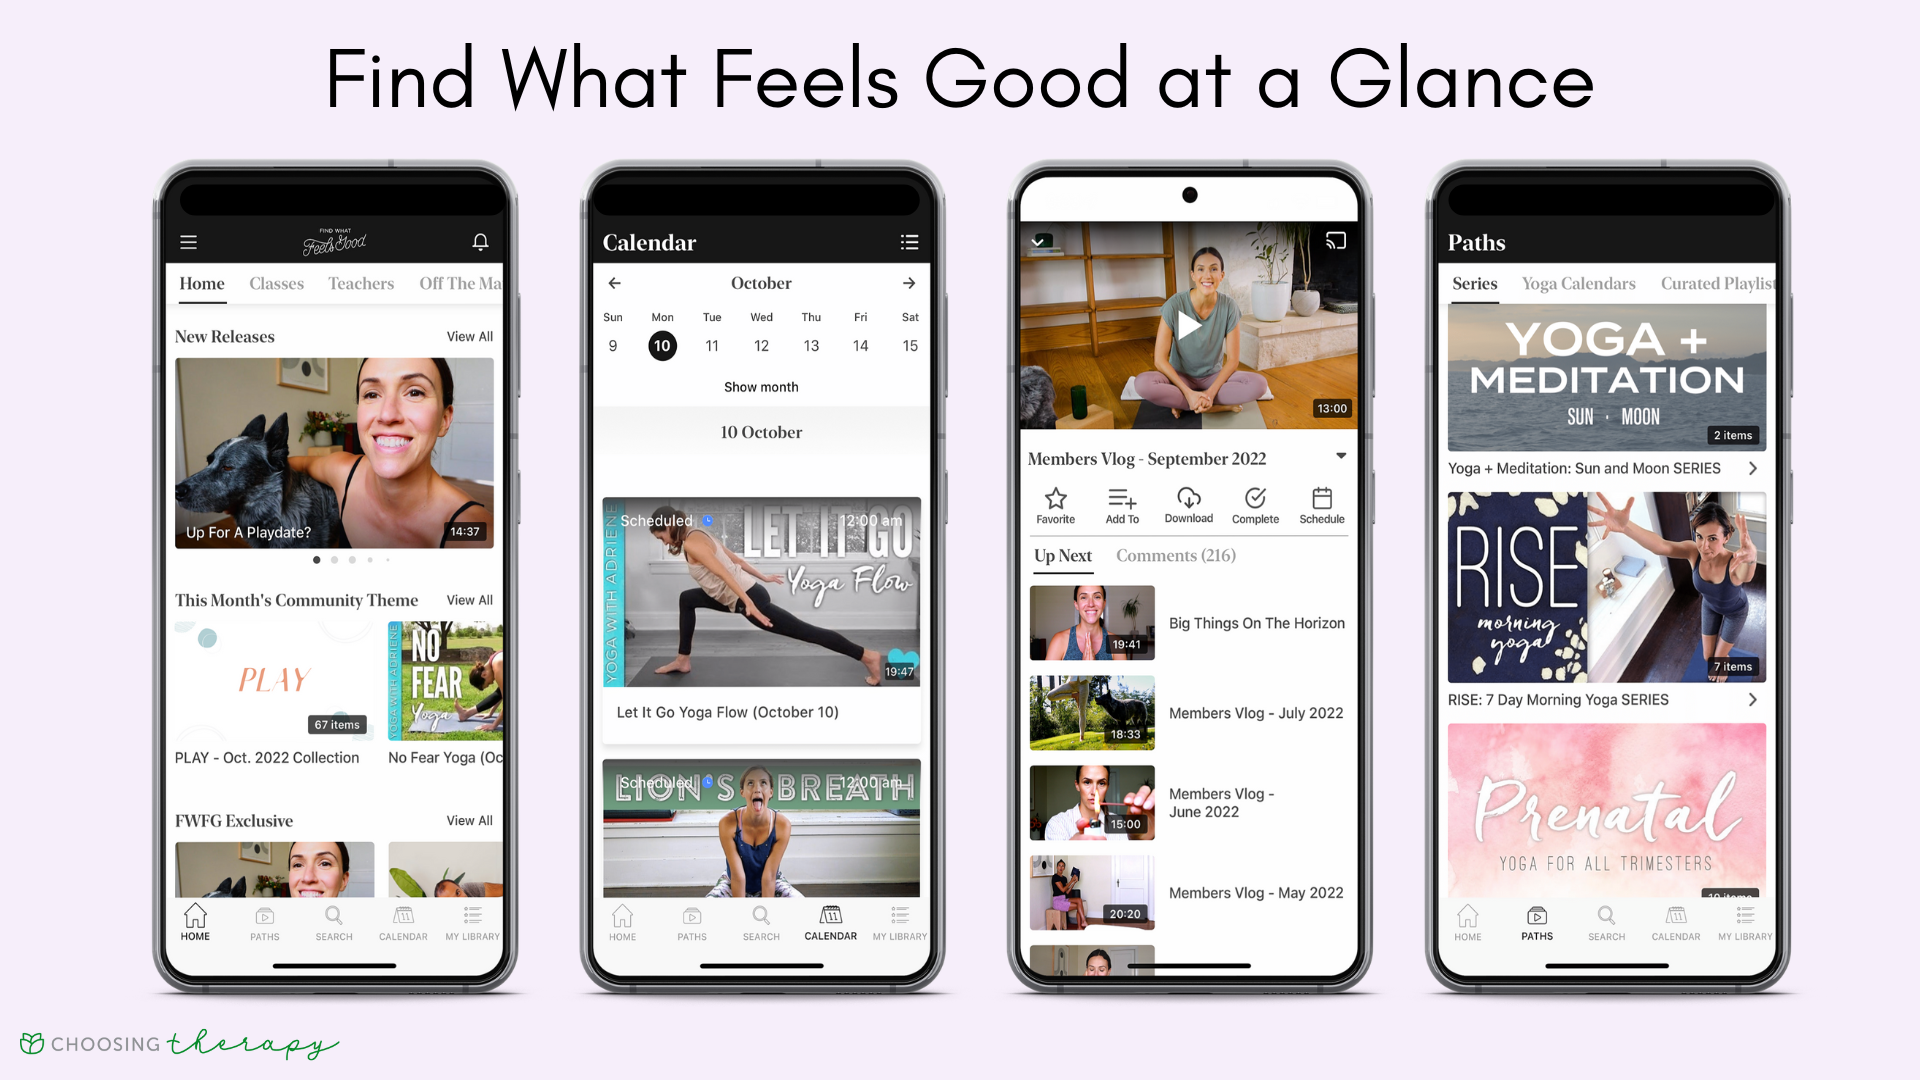 Four images of the key features of the Find What Feels Good yoga app